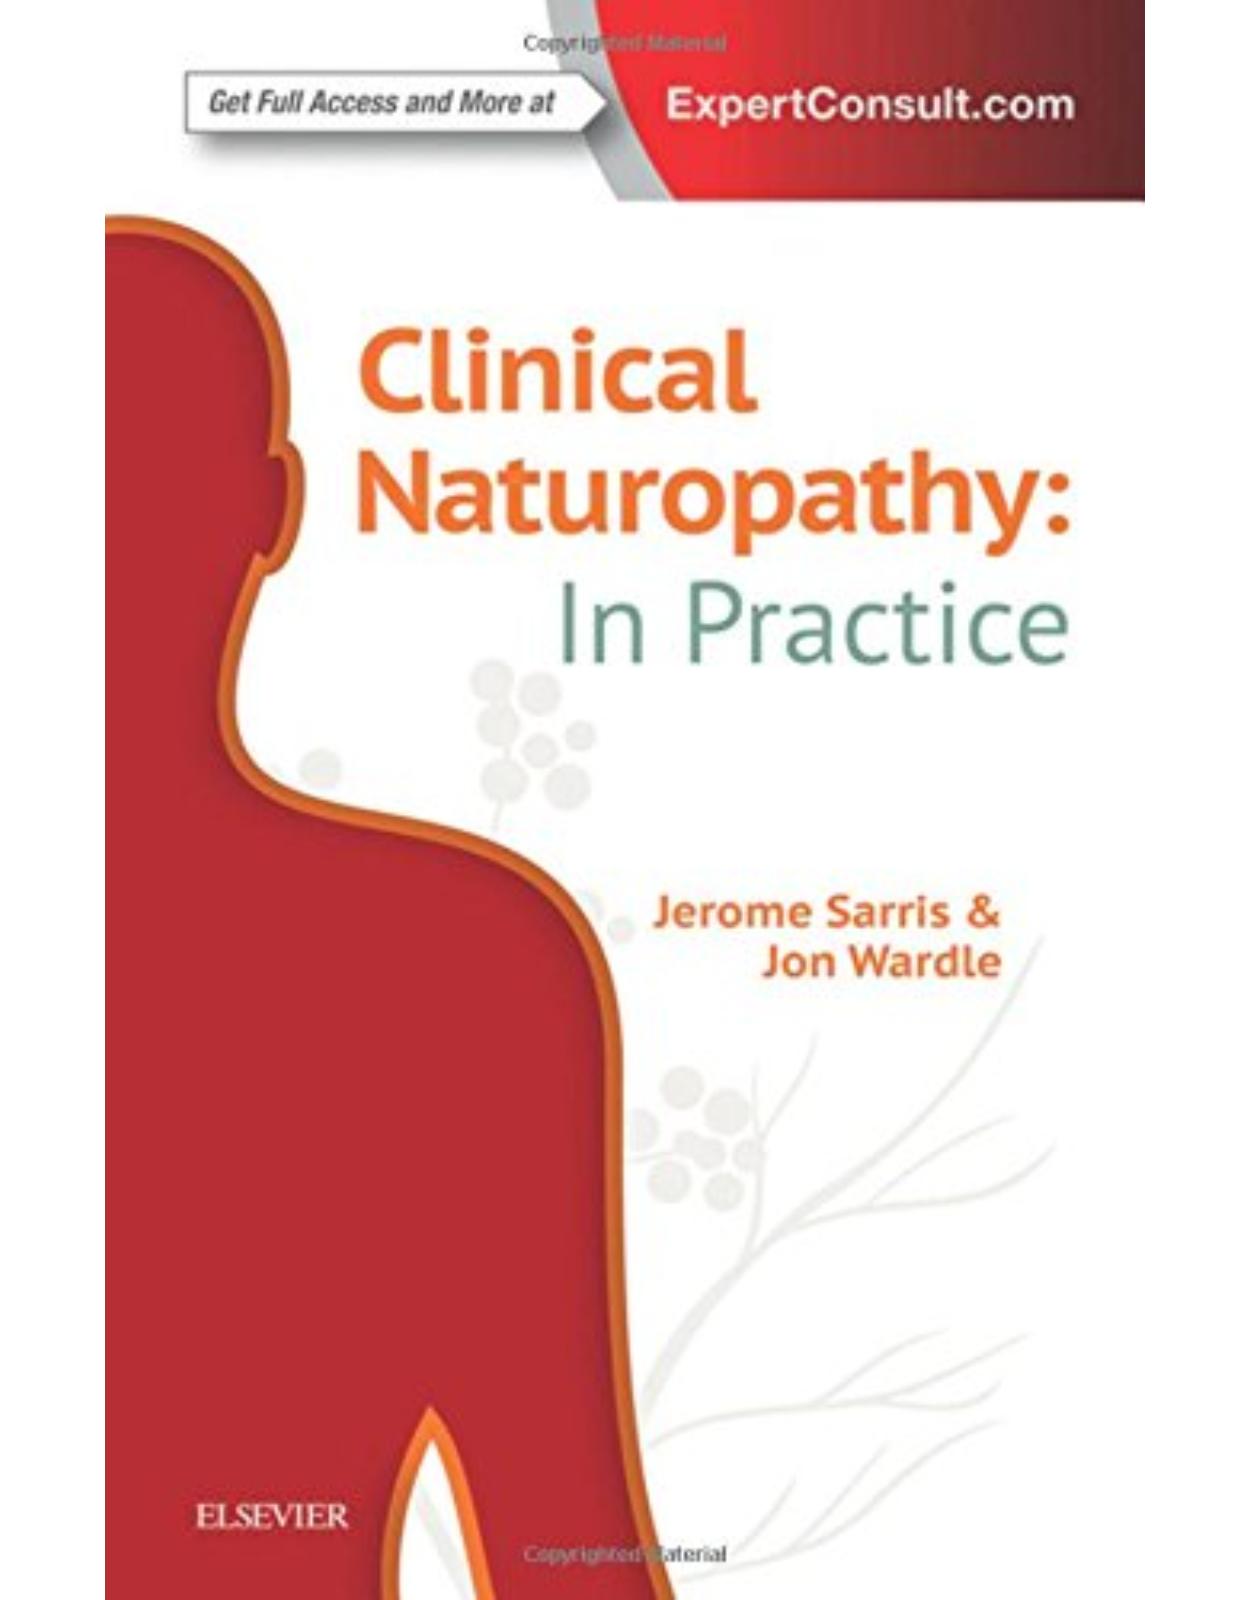 Clinical Naturopathy: In Practice, 1e